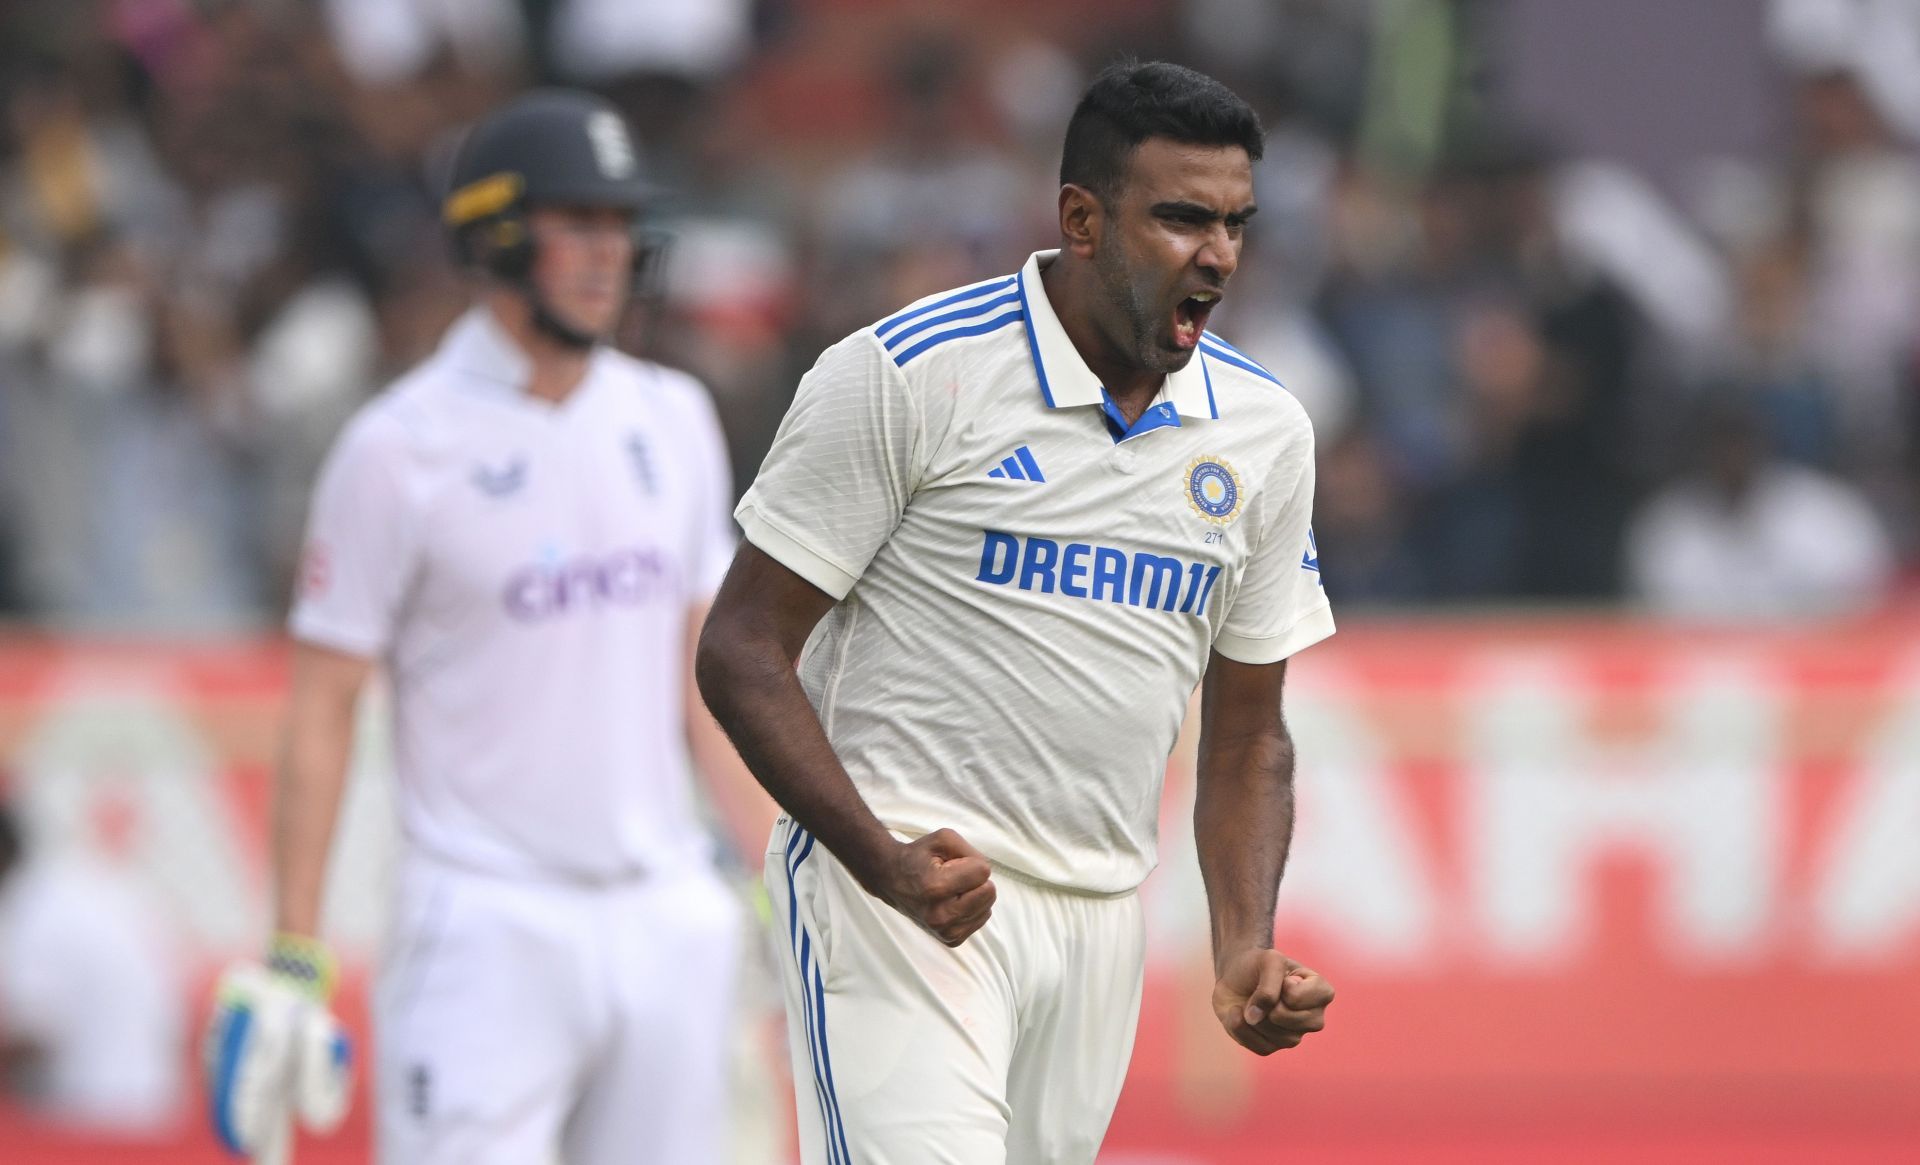 Ravichandran Ashwin picked up three wickets in England&#039;s second innings. [P/C: Getty]